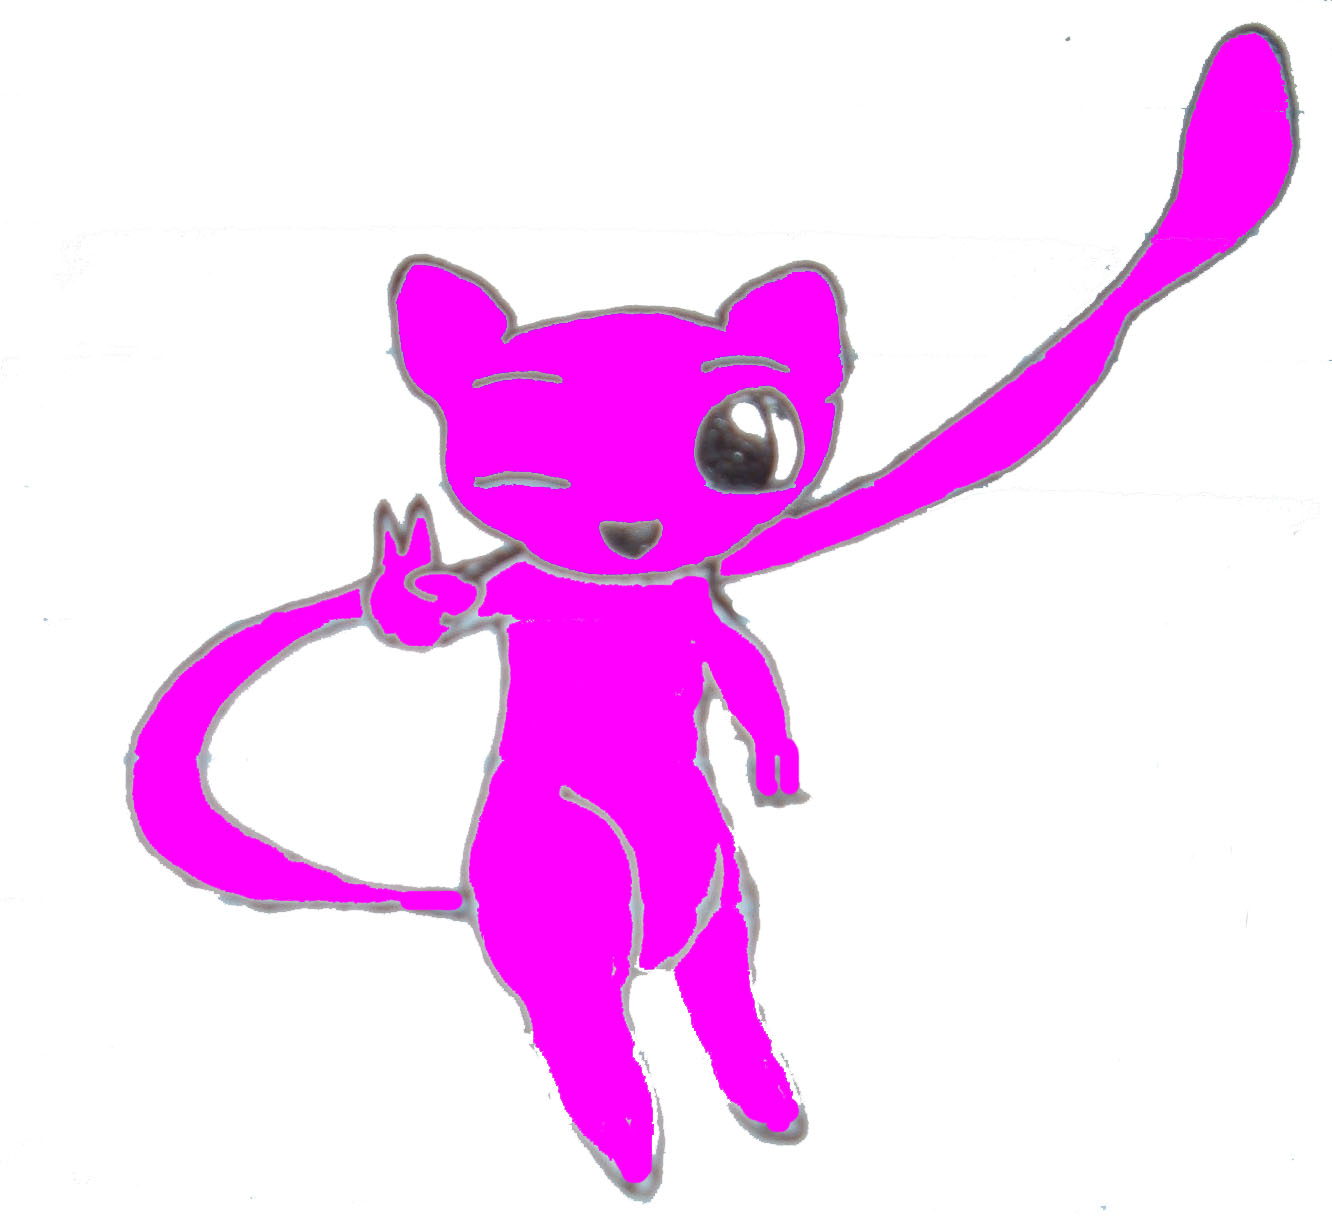 Me as Mew by deadmewtwo